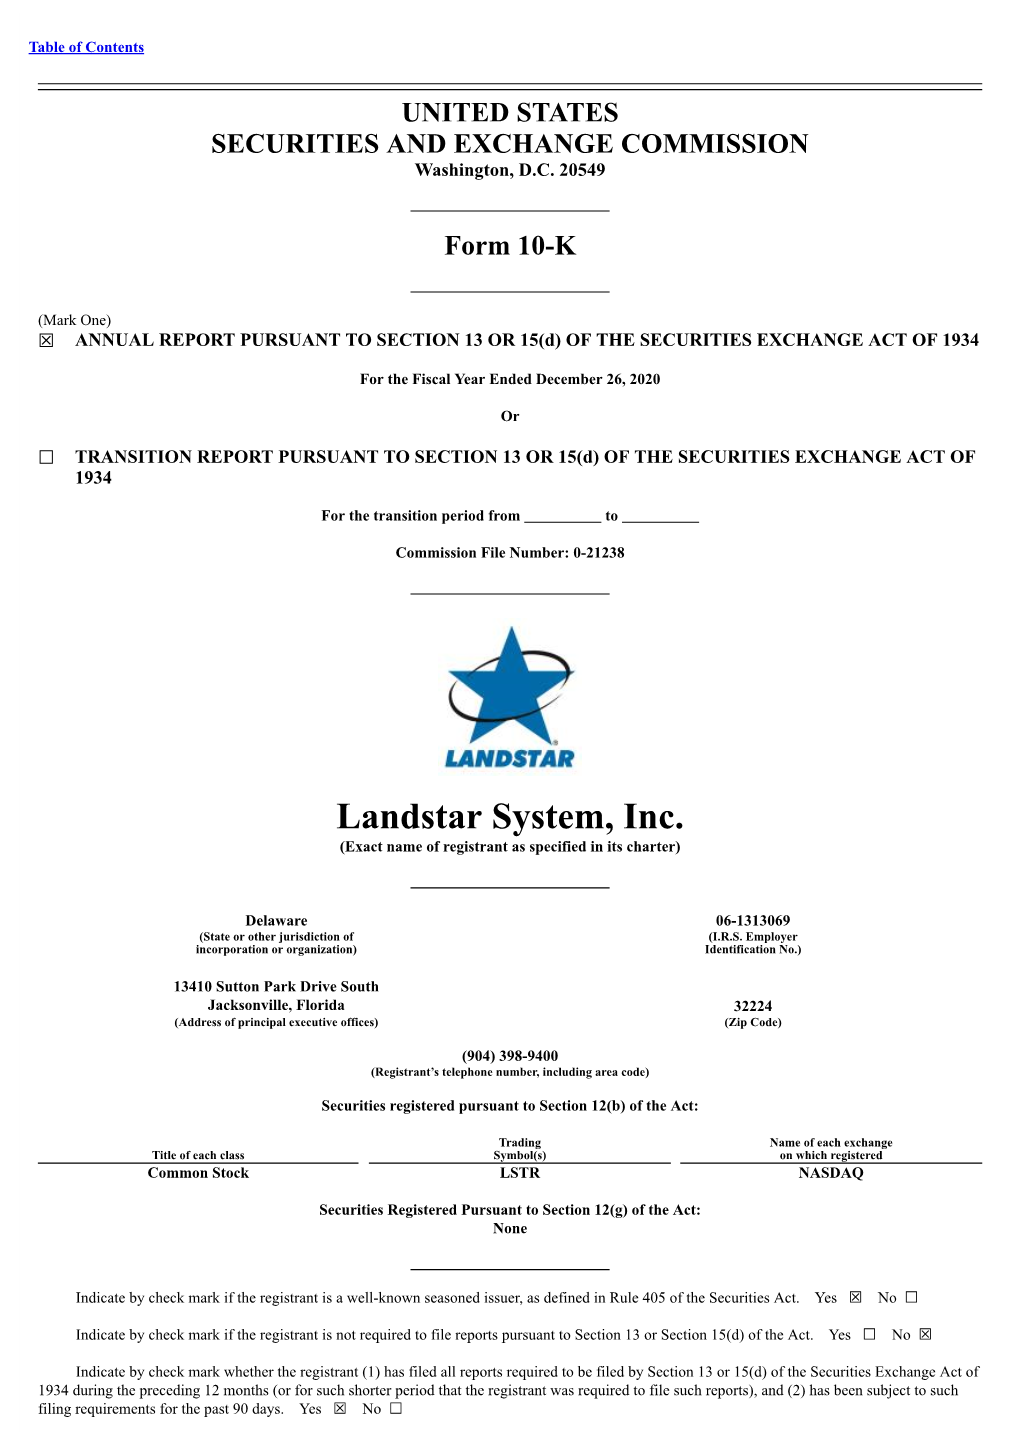 Landstar System, Inc. (Exact Name of Registrant As Specified in Its Charter)